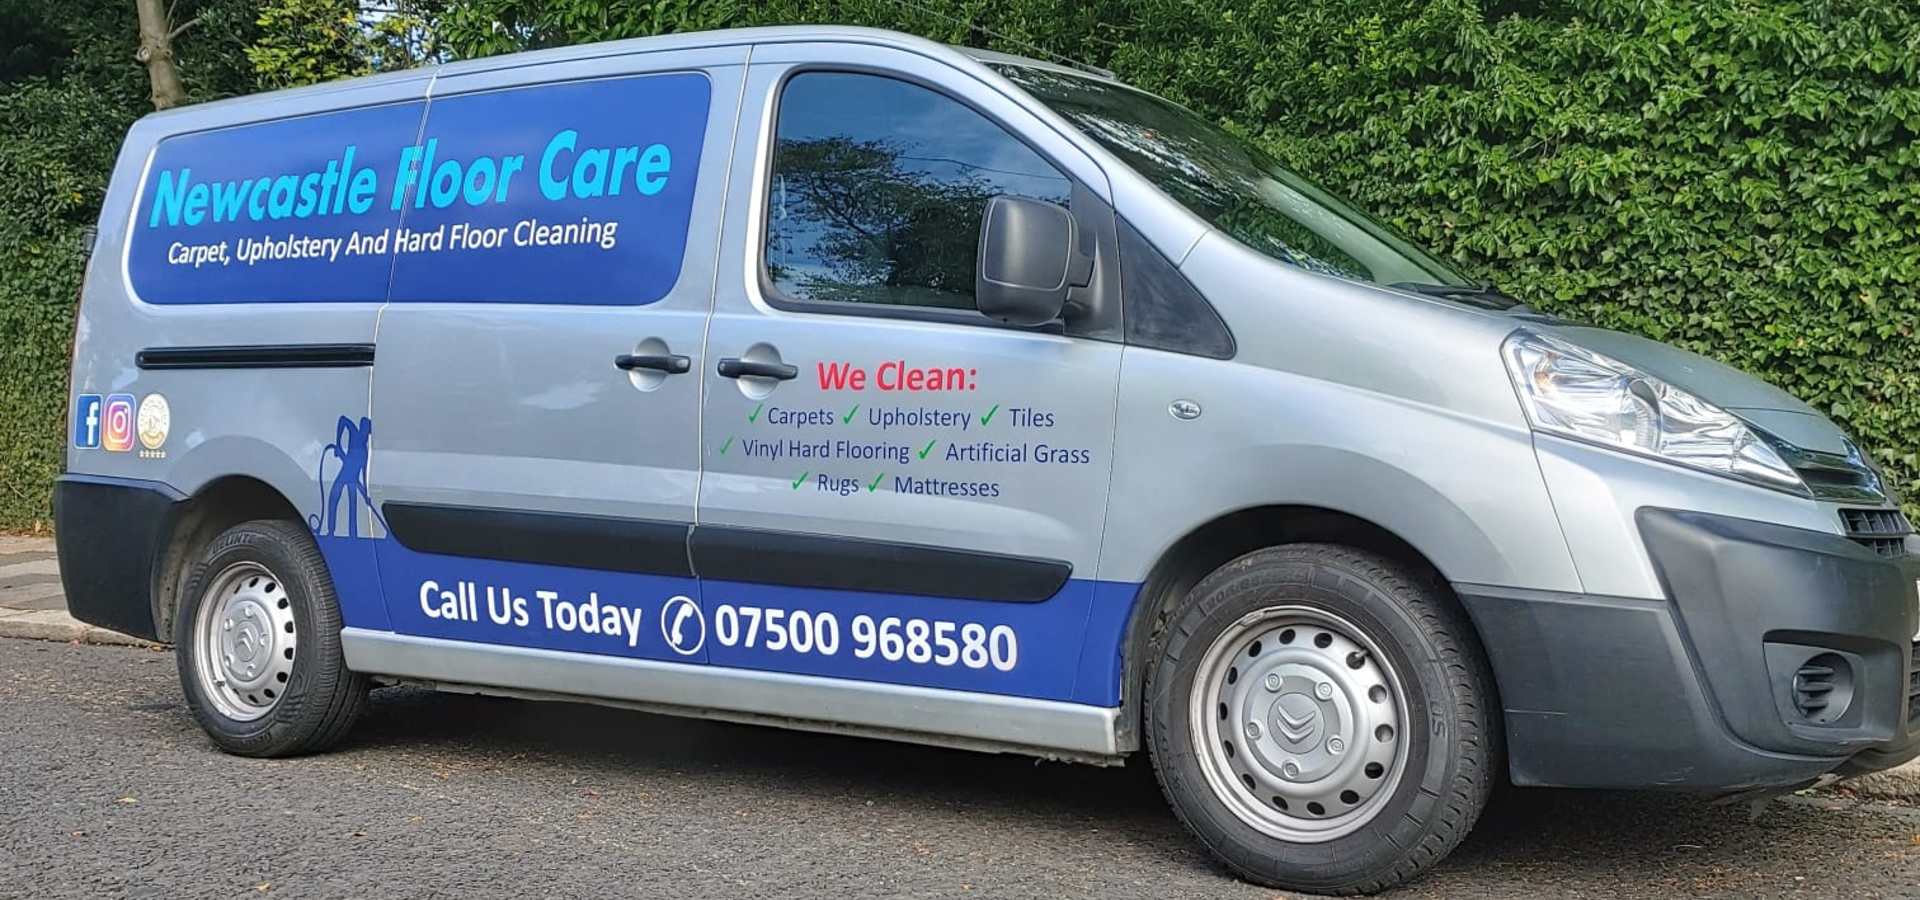 newcastle floor care services